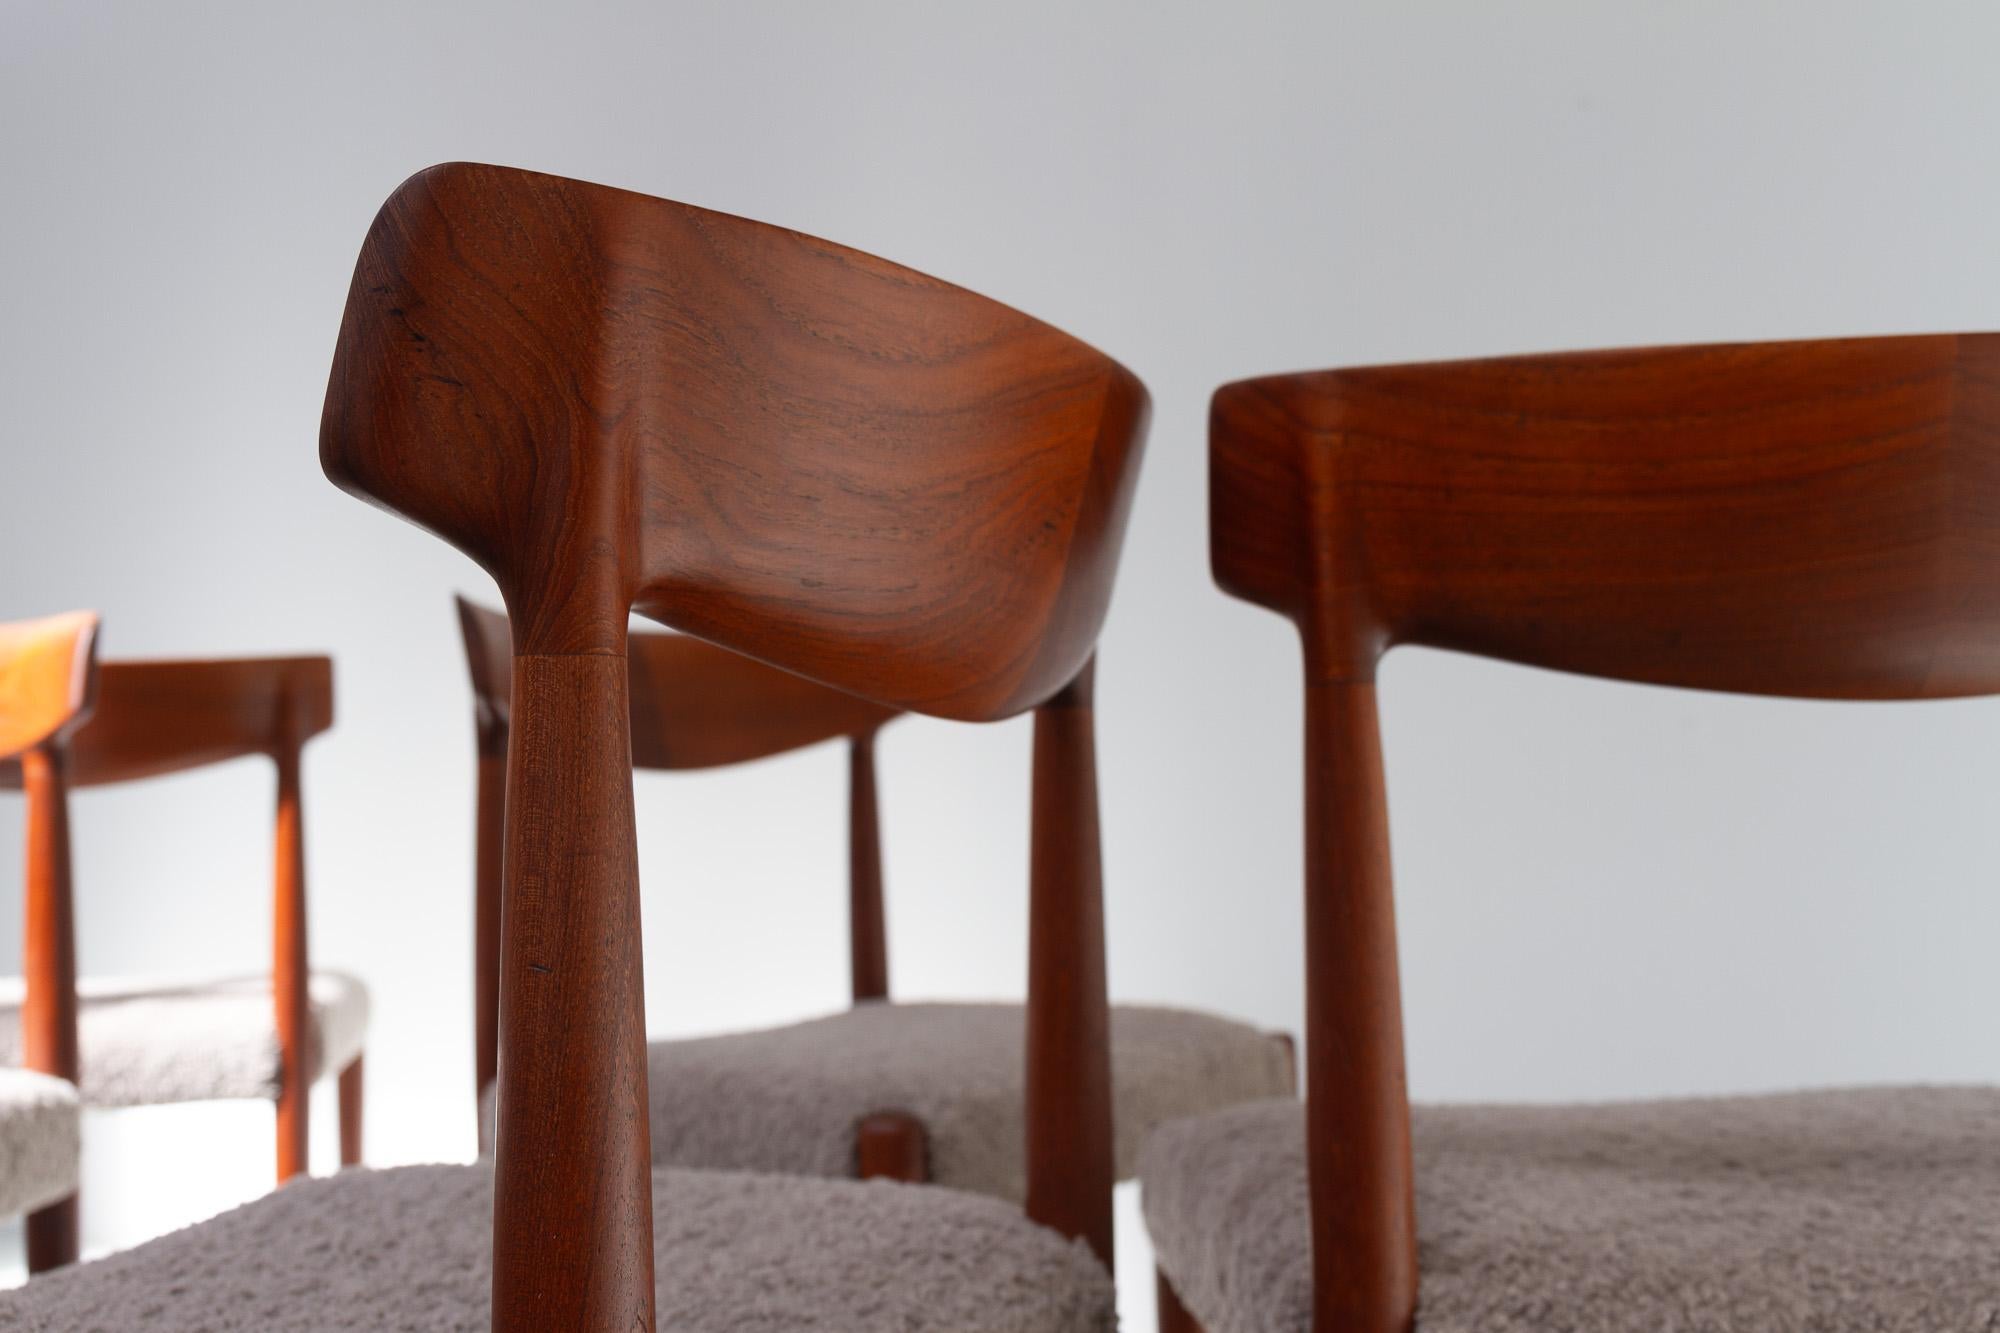 Danish Modern Teak Dining Chairs by Knud Færch for Slagelse, 1960s. Set of 6. For Sale 6